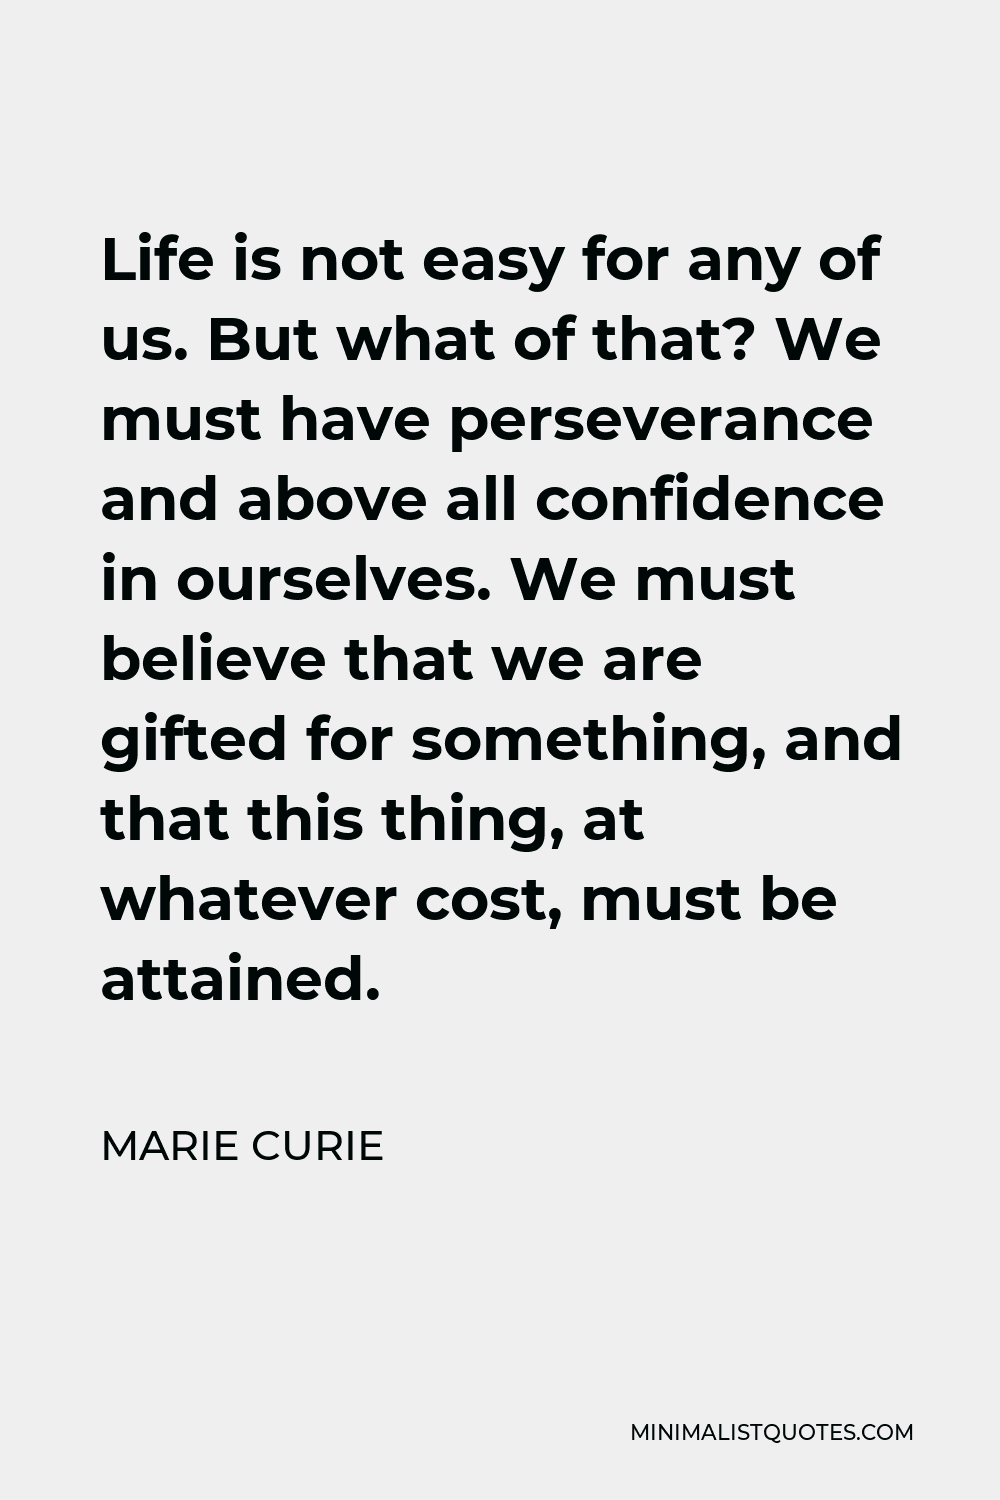 Marie Curie Quote - Life is not easy for any of us. But what of that? We must have perseverance and above all confidence in ourselves. We must believe that we are gifted for something, and that this thing, at whatever cost, must be attained.